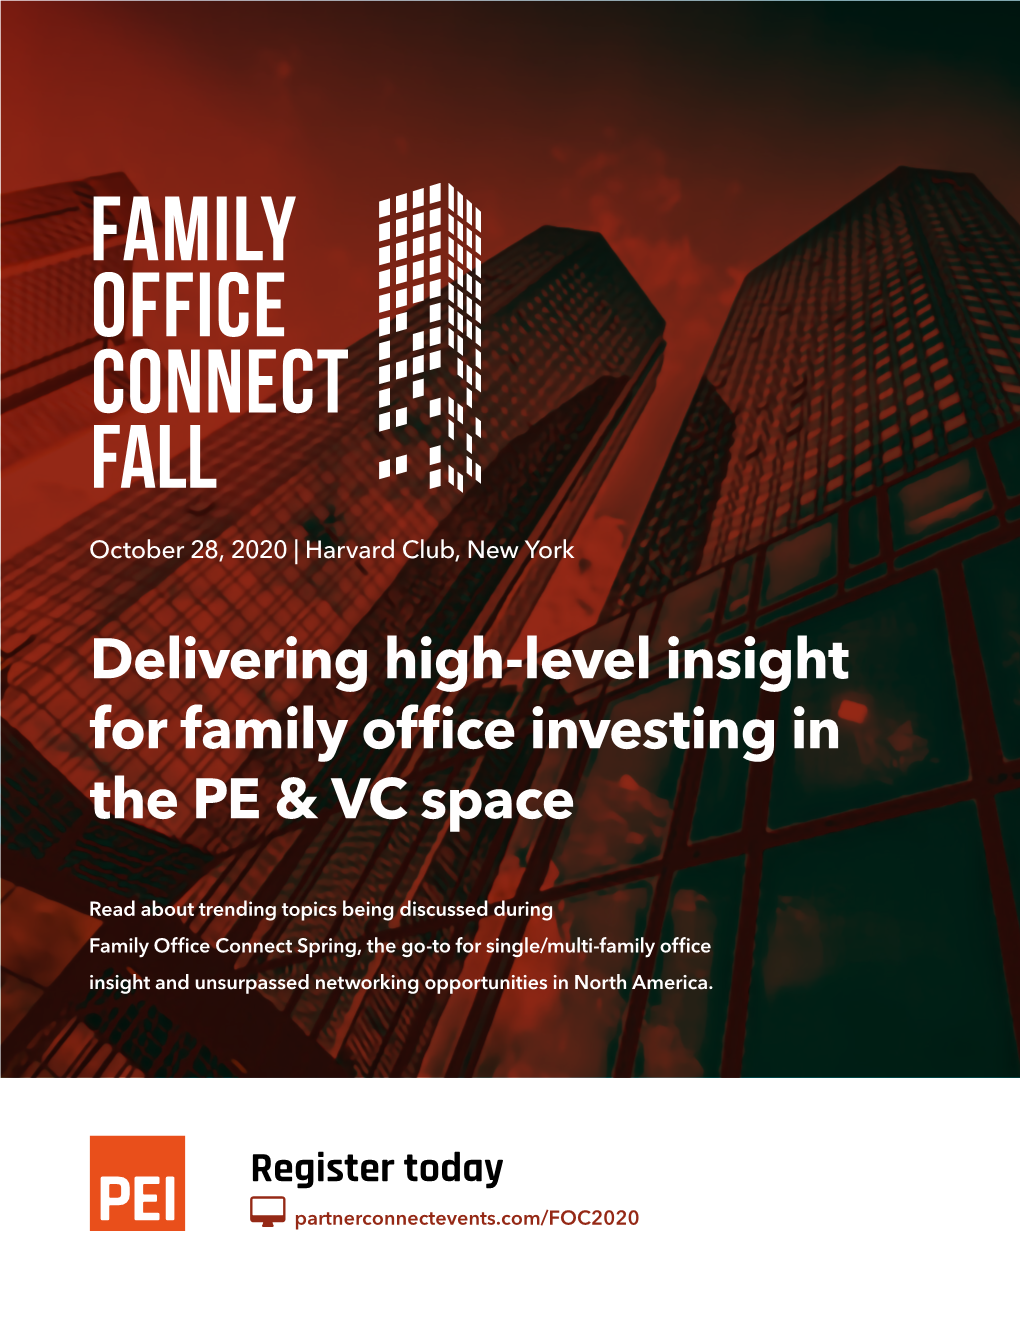 Delivering High-Level Insight for Family Office Investing in the PE & VC Space